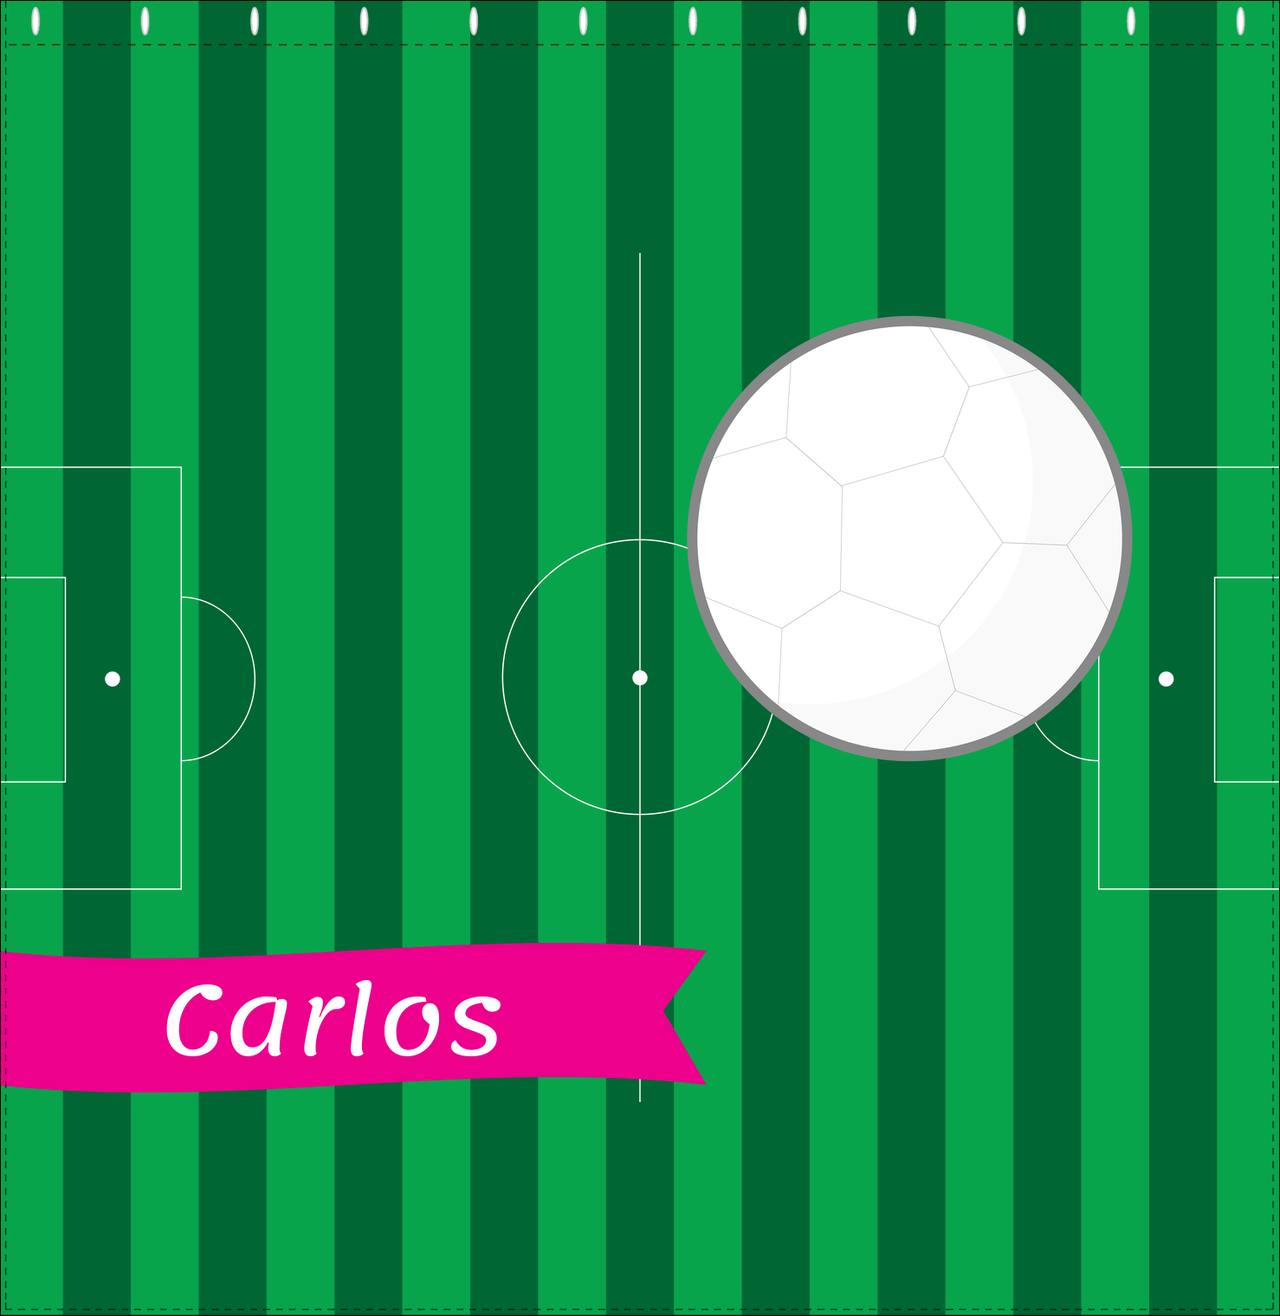 Personalized Soccer Shower Curtain VI - Green Background - Soccer Ball II - Decorate View